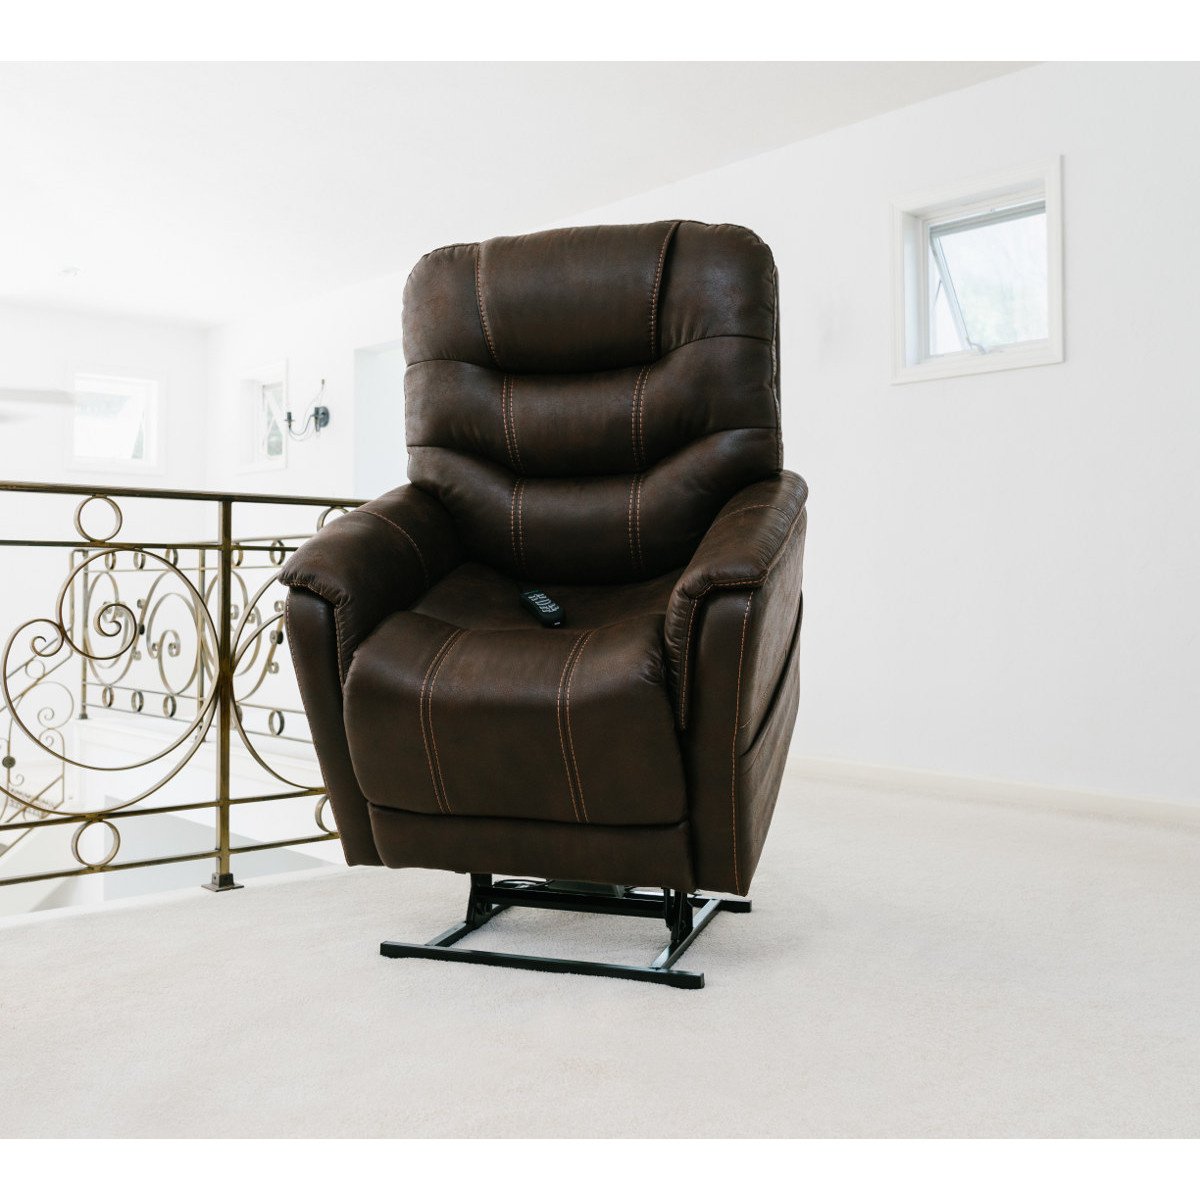 Pride VivaLift Elegance 2 Lift Chair by Pride Mobility - Free Shipping,  Tax-Free Sales & More